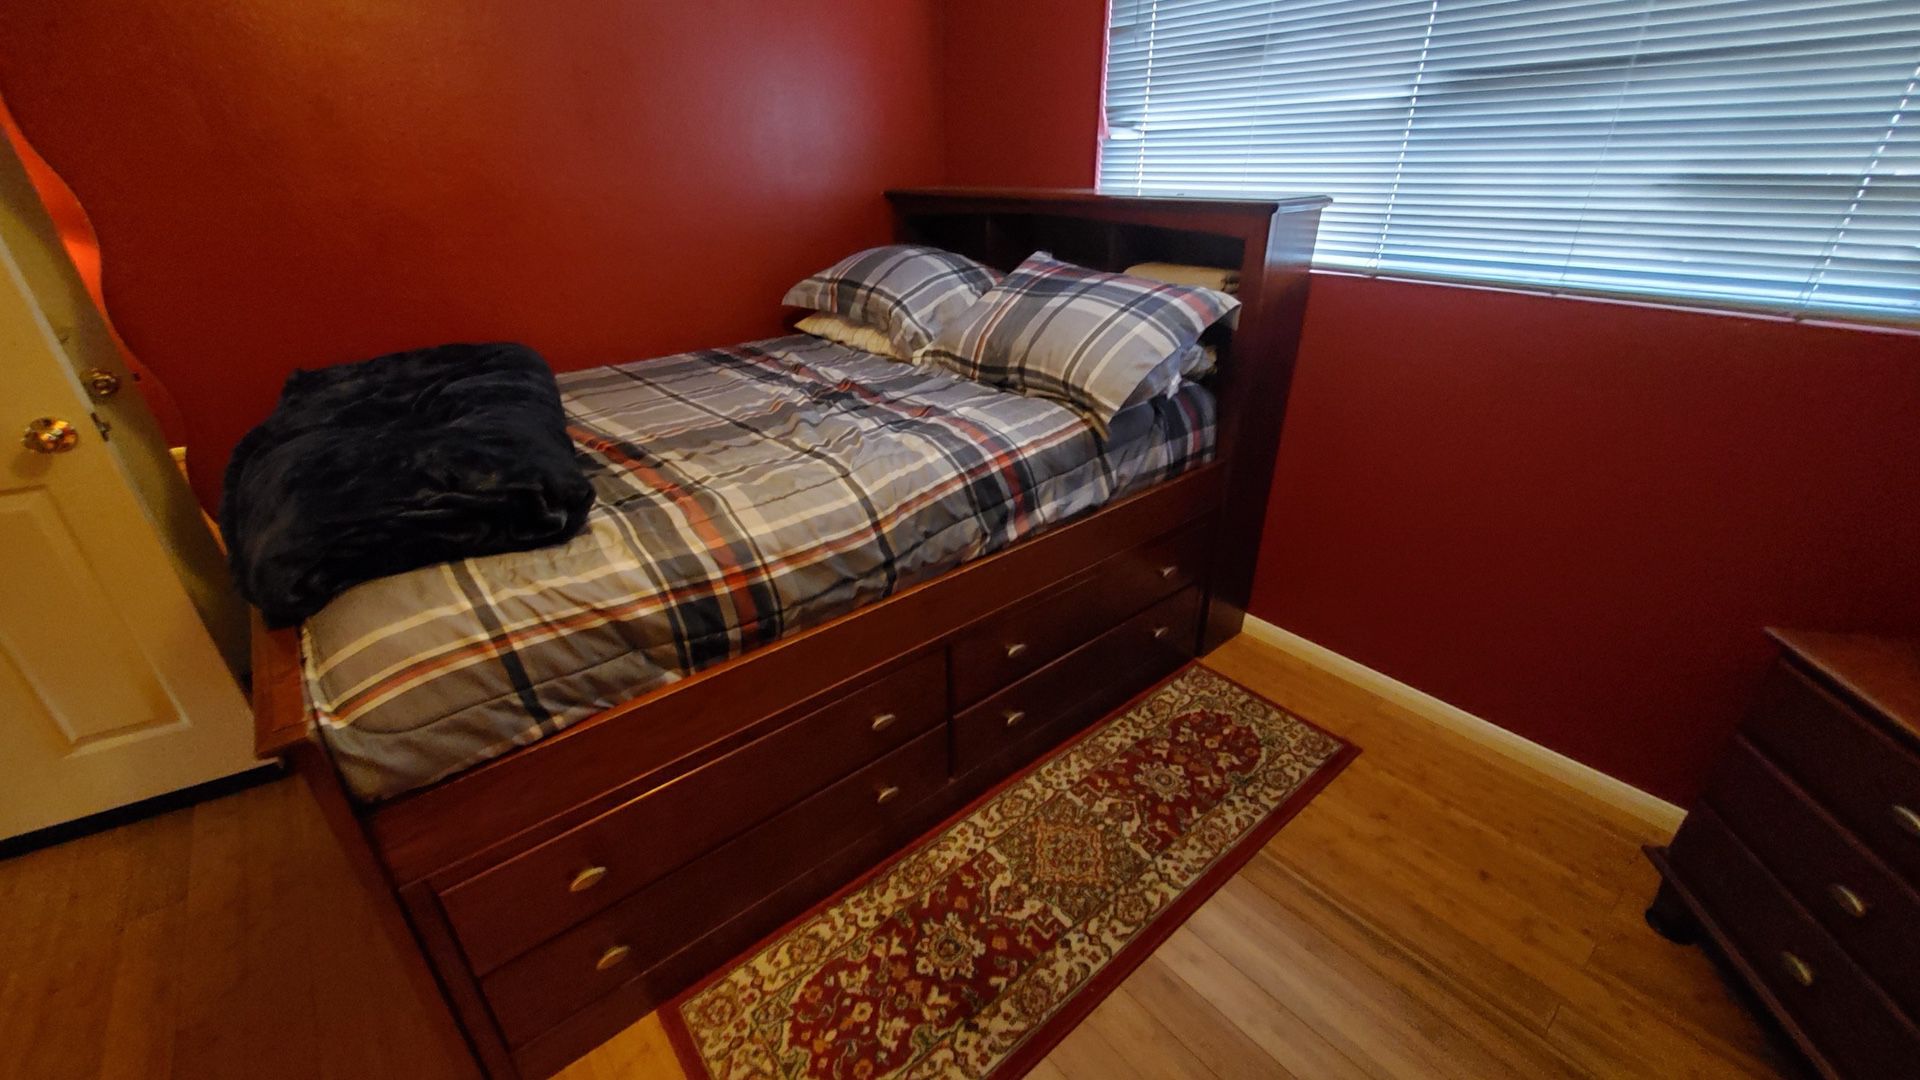 Full bed frame with storage